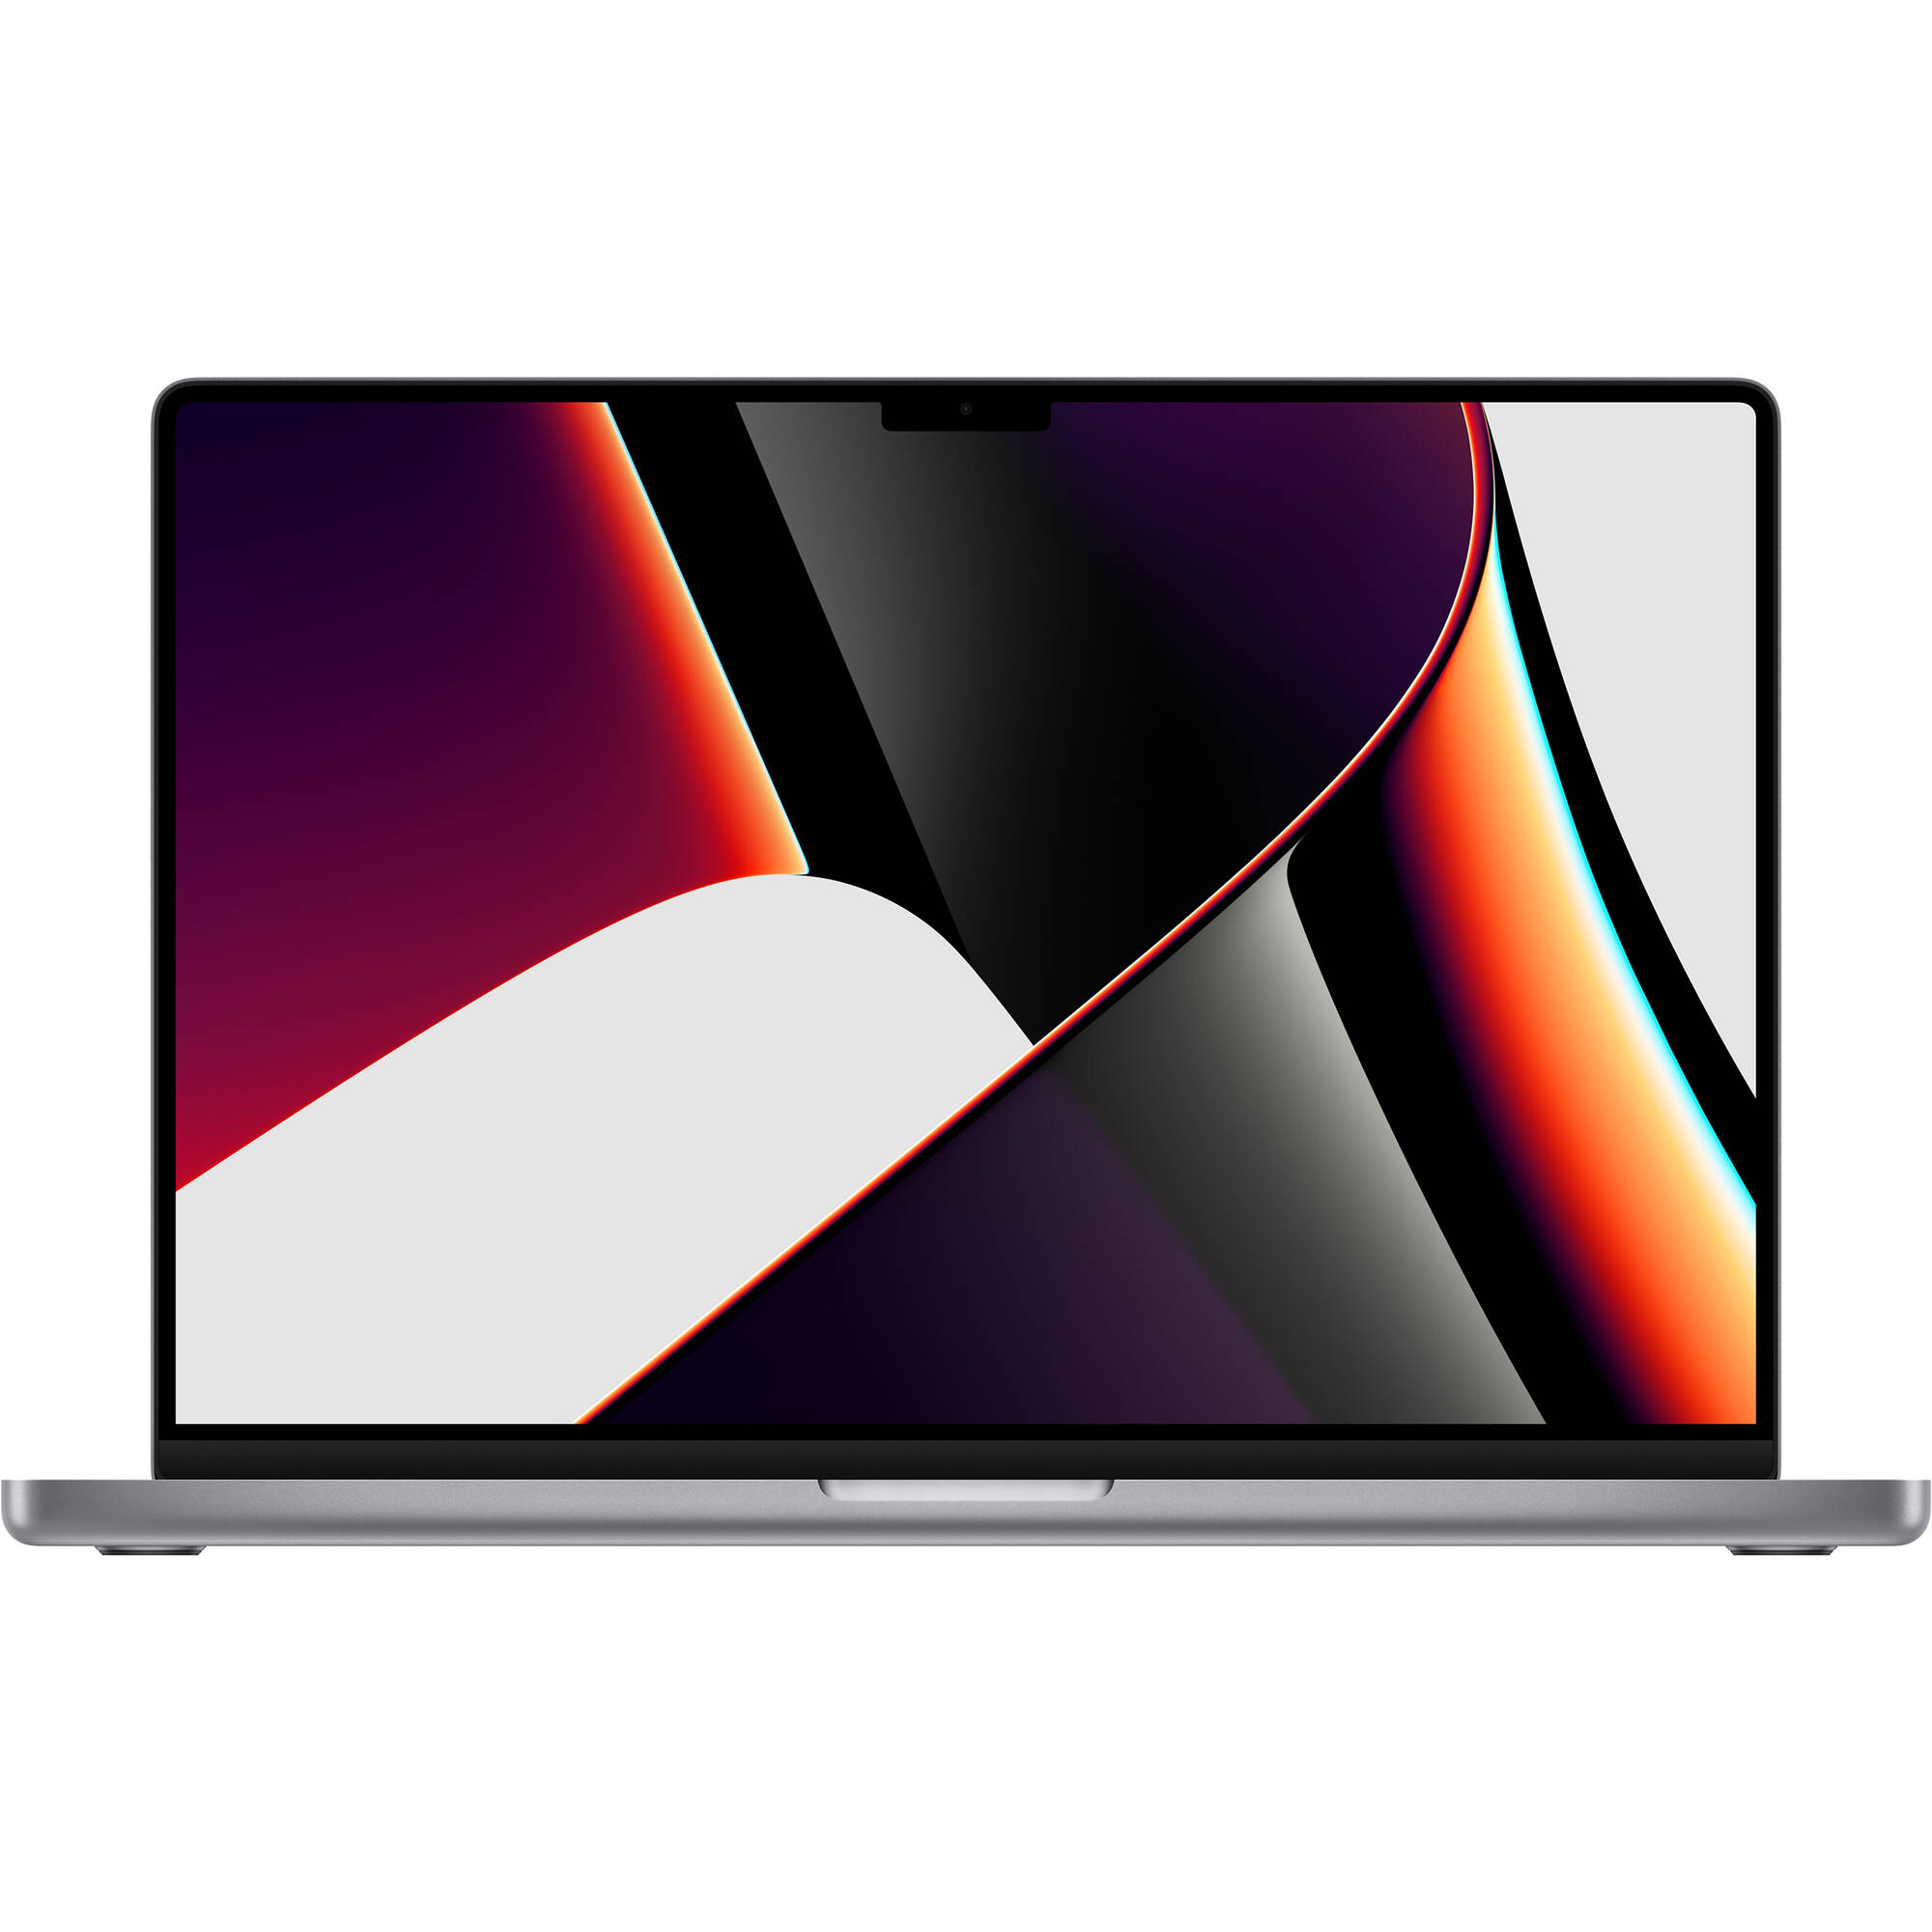 Apple MacBook Pro con M1 Max Chip 16.2" Late 2021 Space Gray (Gris)